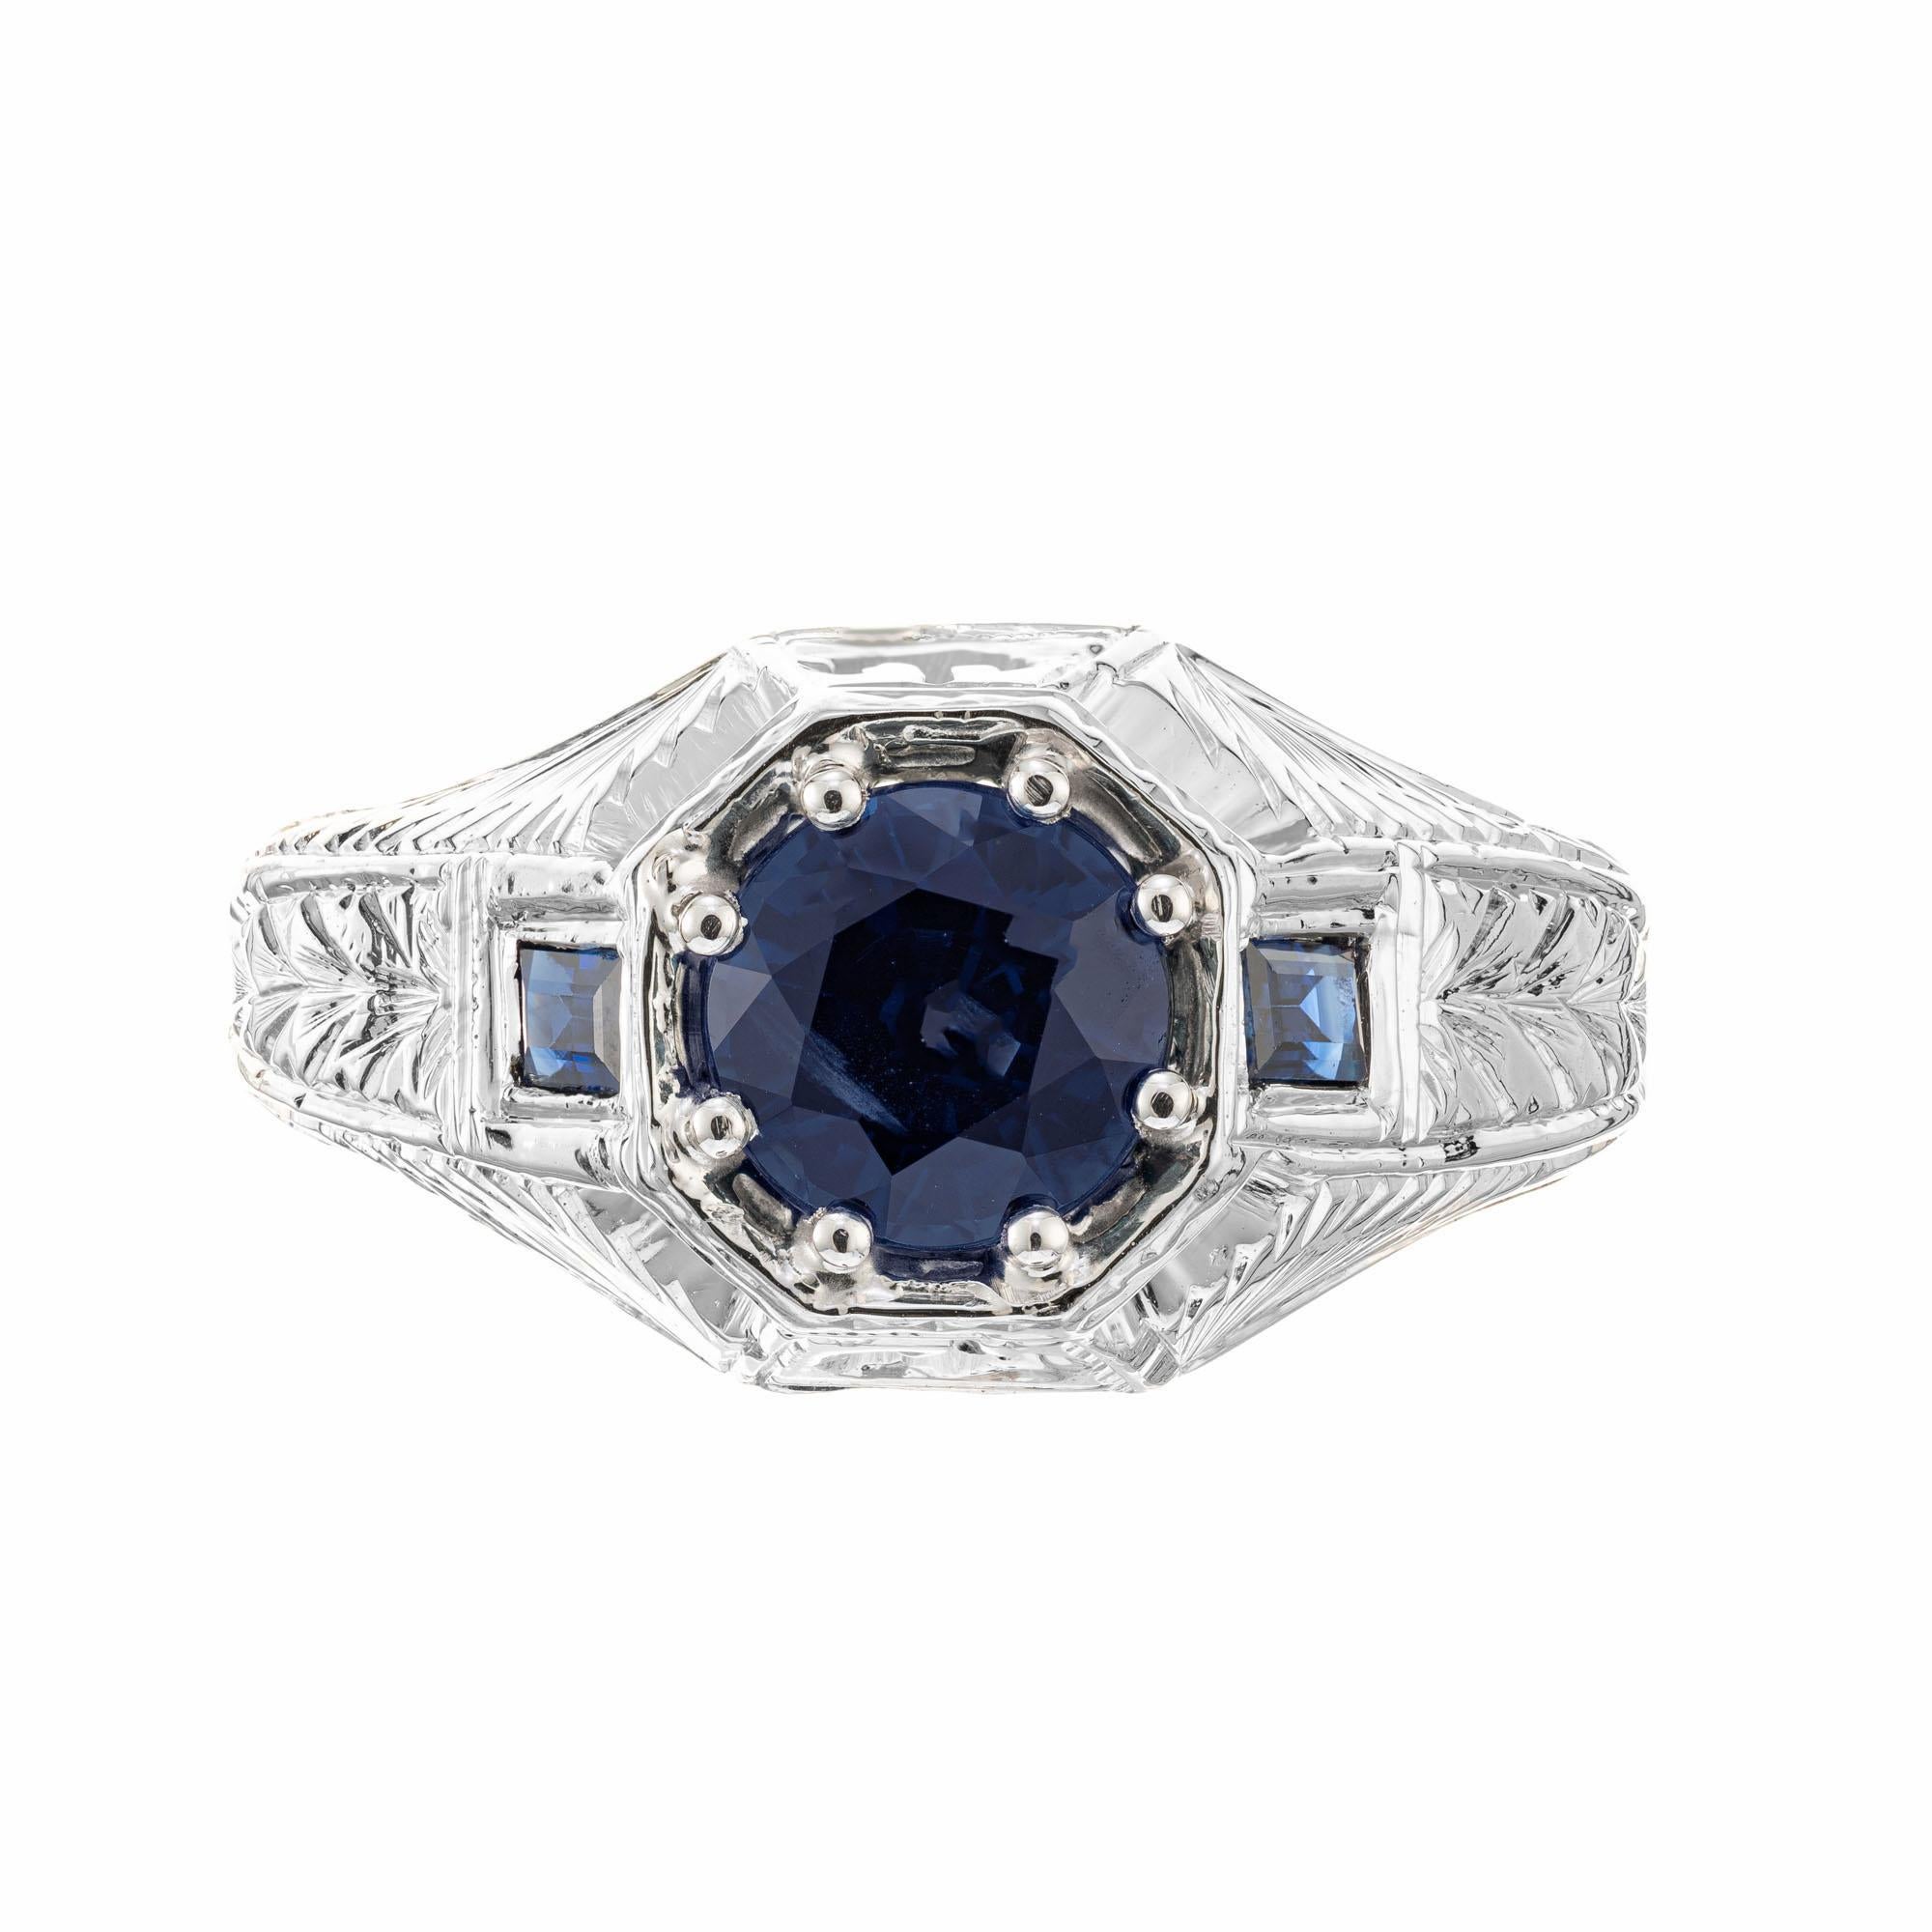 Vintage 1940's 20k white gold hand engraved men's natural sapphire ring. GIA certified simple heat only round blue sapphire in a 20k white gold setting with 2 step cut baguette sapphires.  

1 round blue sapphire, VS2 approx. 1.62cts. GIA certified#